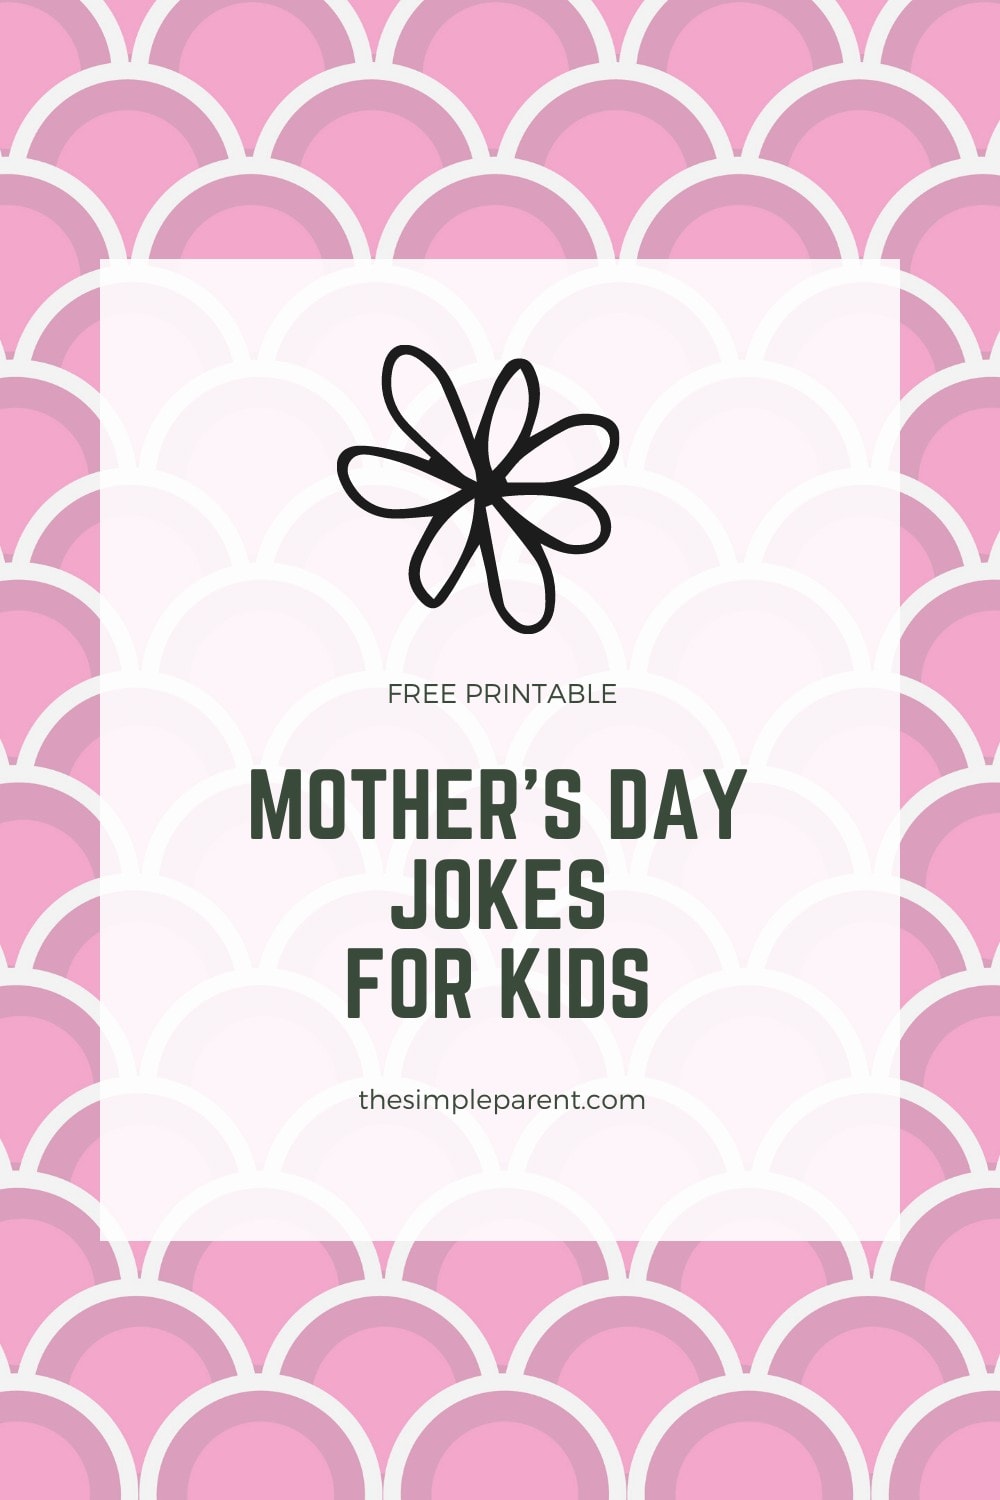 Mother's Day Jokes for Kids! Laugh with Mom! (FREE Printable Jokes)